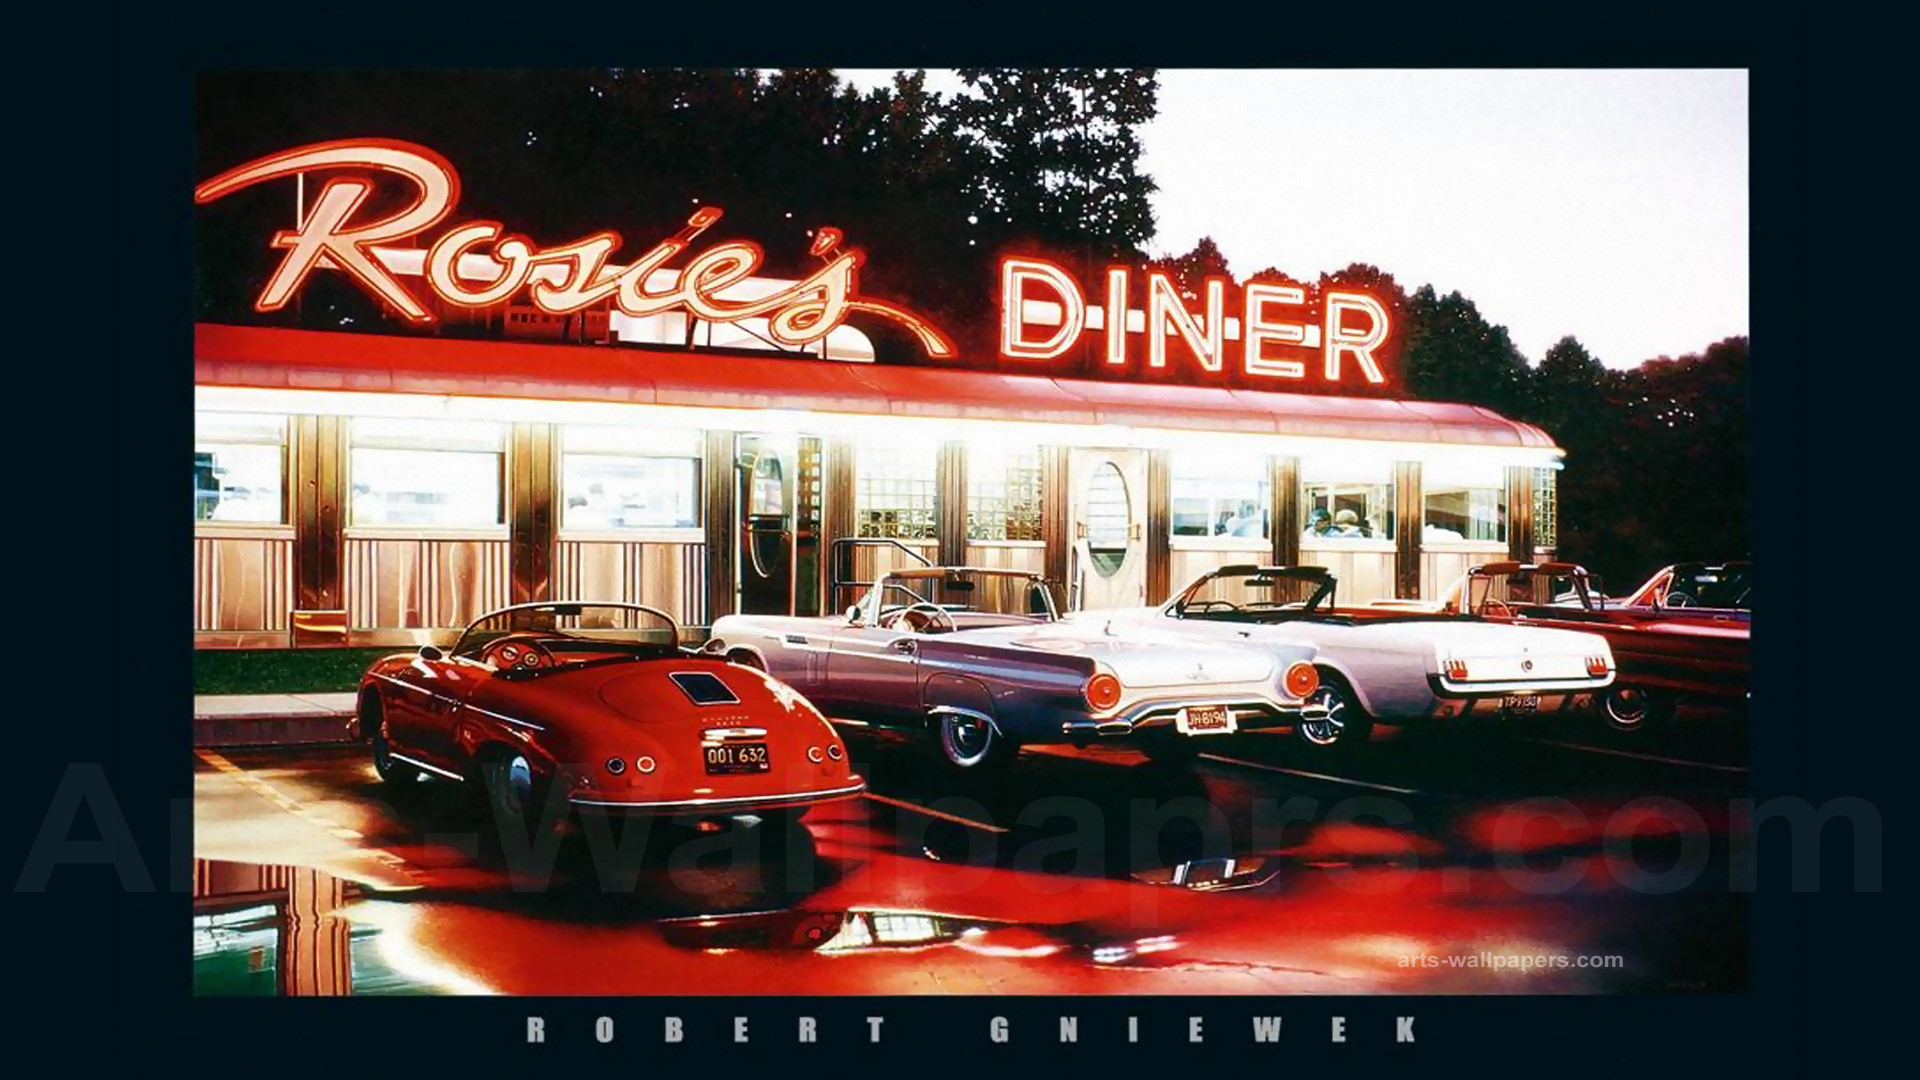 1920x1080 view image. Found on: american-diner-wallpaper/